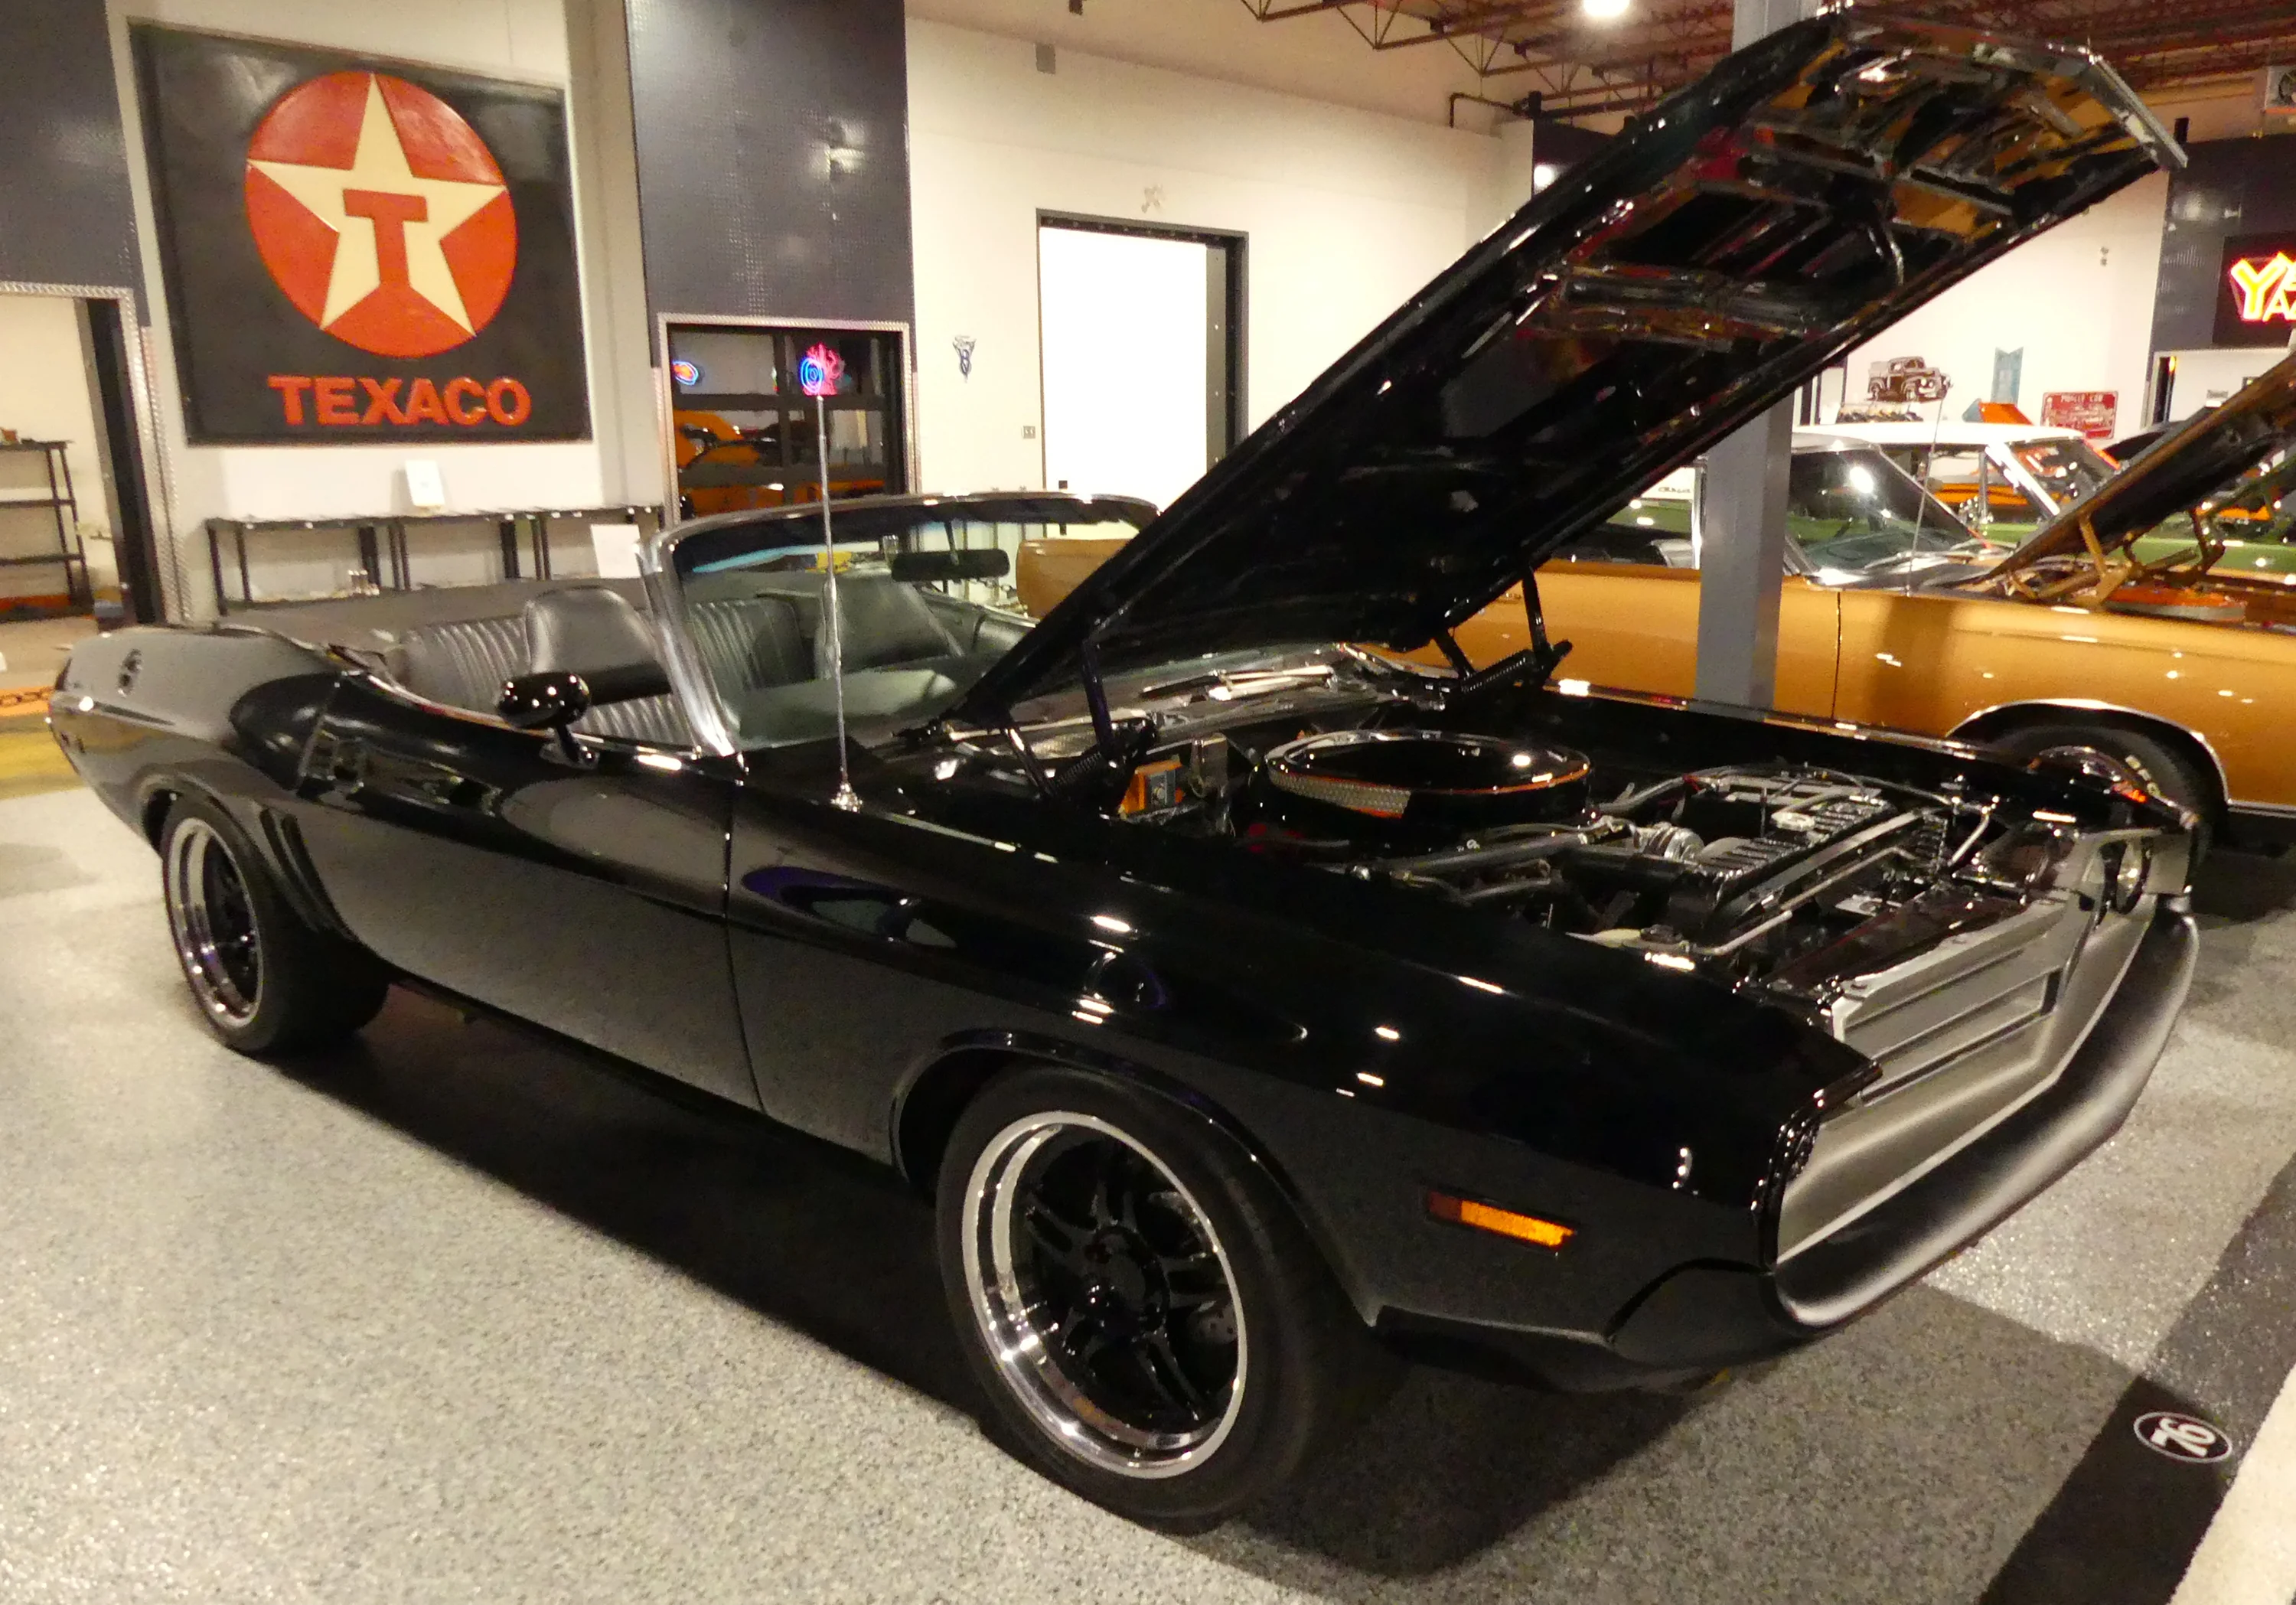 1970 Plymouth Cuda:
                                        Only one Vitamin C Cuda convertible exists. This is a clone car of the original that sold at Barret Jackson in 2008 for $2M US.